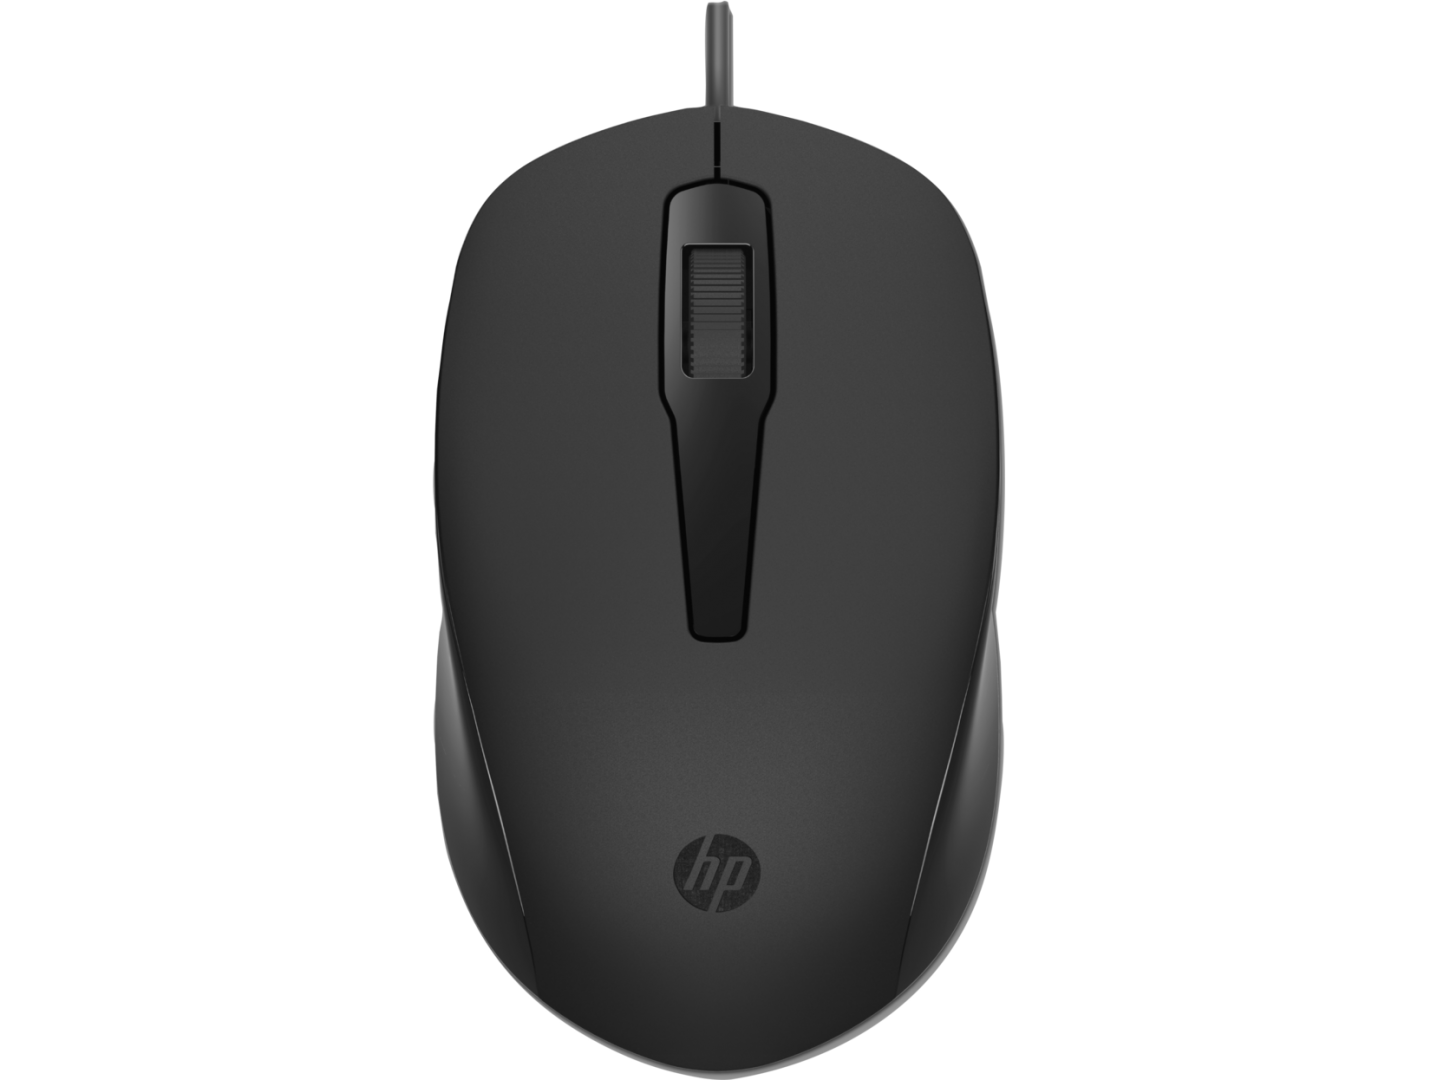 HP Mouse USB-A wired, black, 3 buttons, ambidextrous, up to 1600 dpi. Dimensions: 10.34 x 6.11 x 3.42 cm. Weight 60g